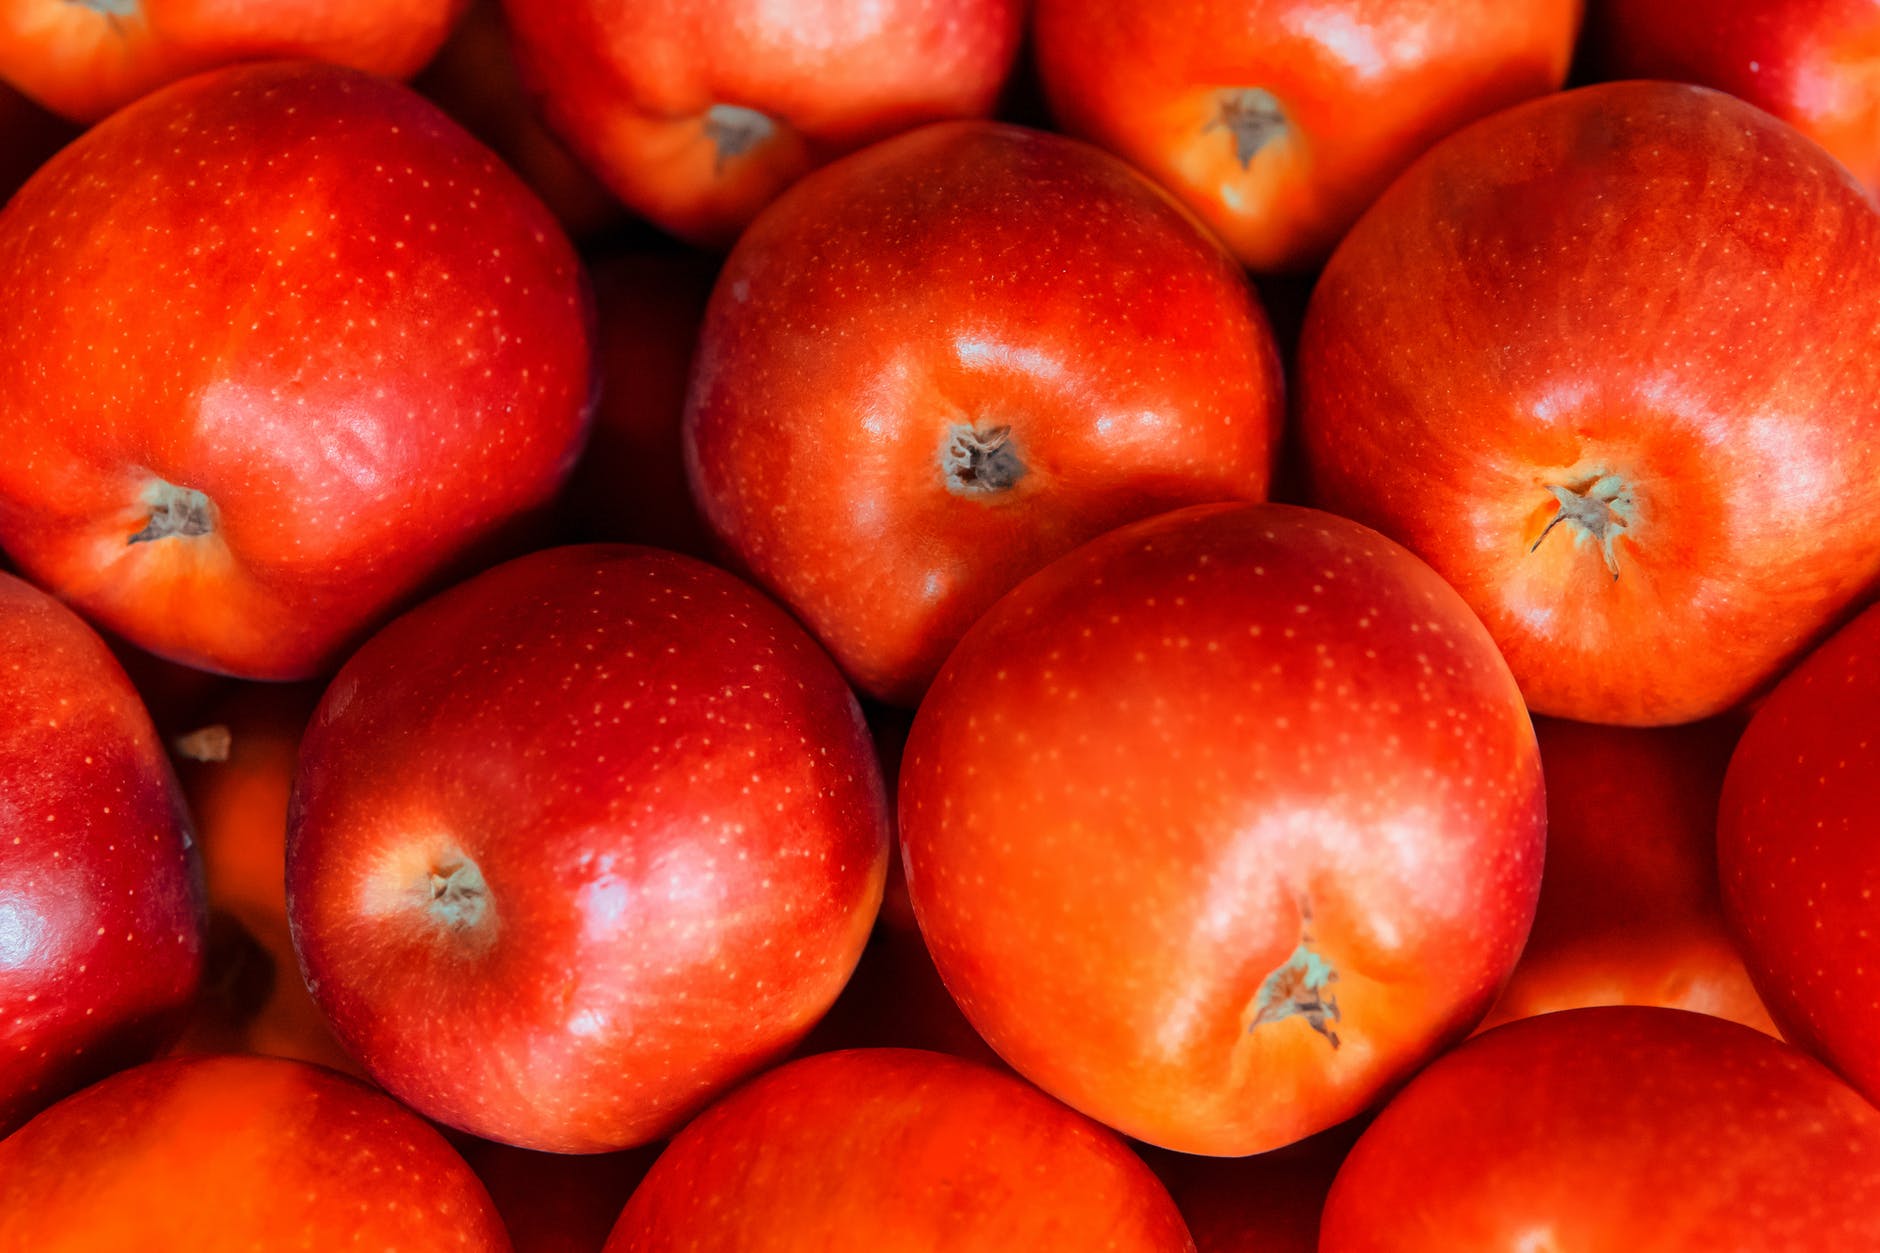 red apple fruits